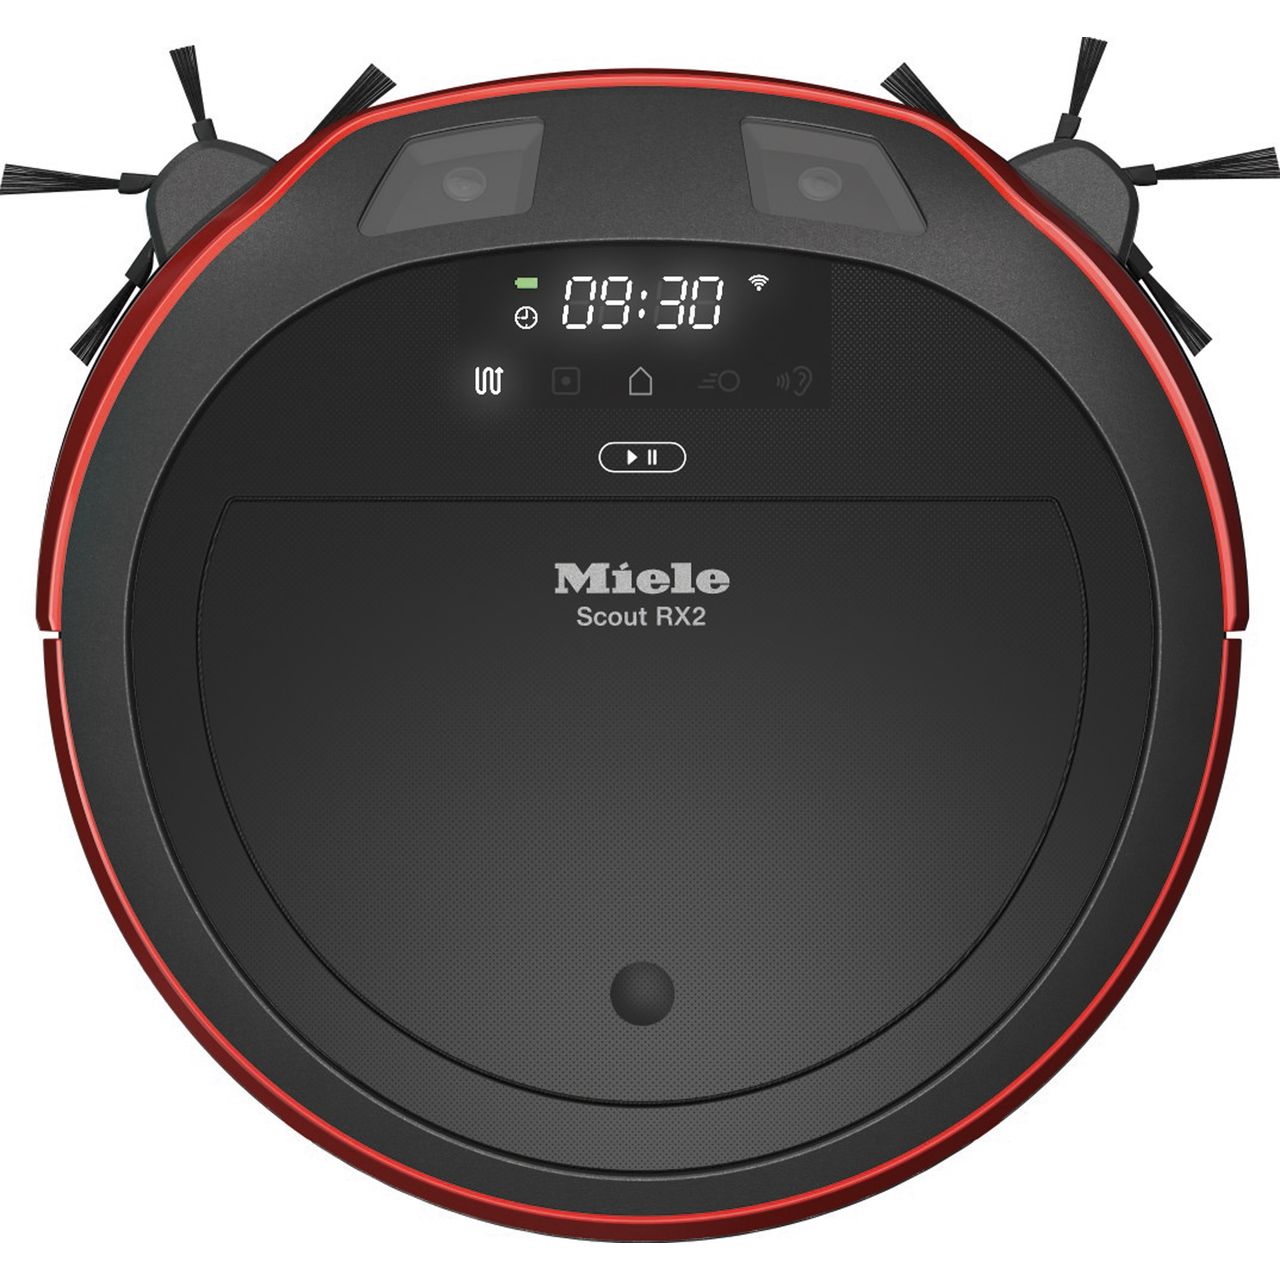 Miele RX2 Scout 10673870 Robotic Vacuum Cleaner Review